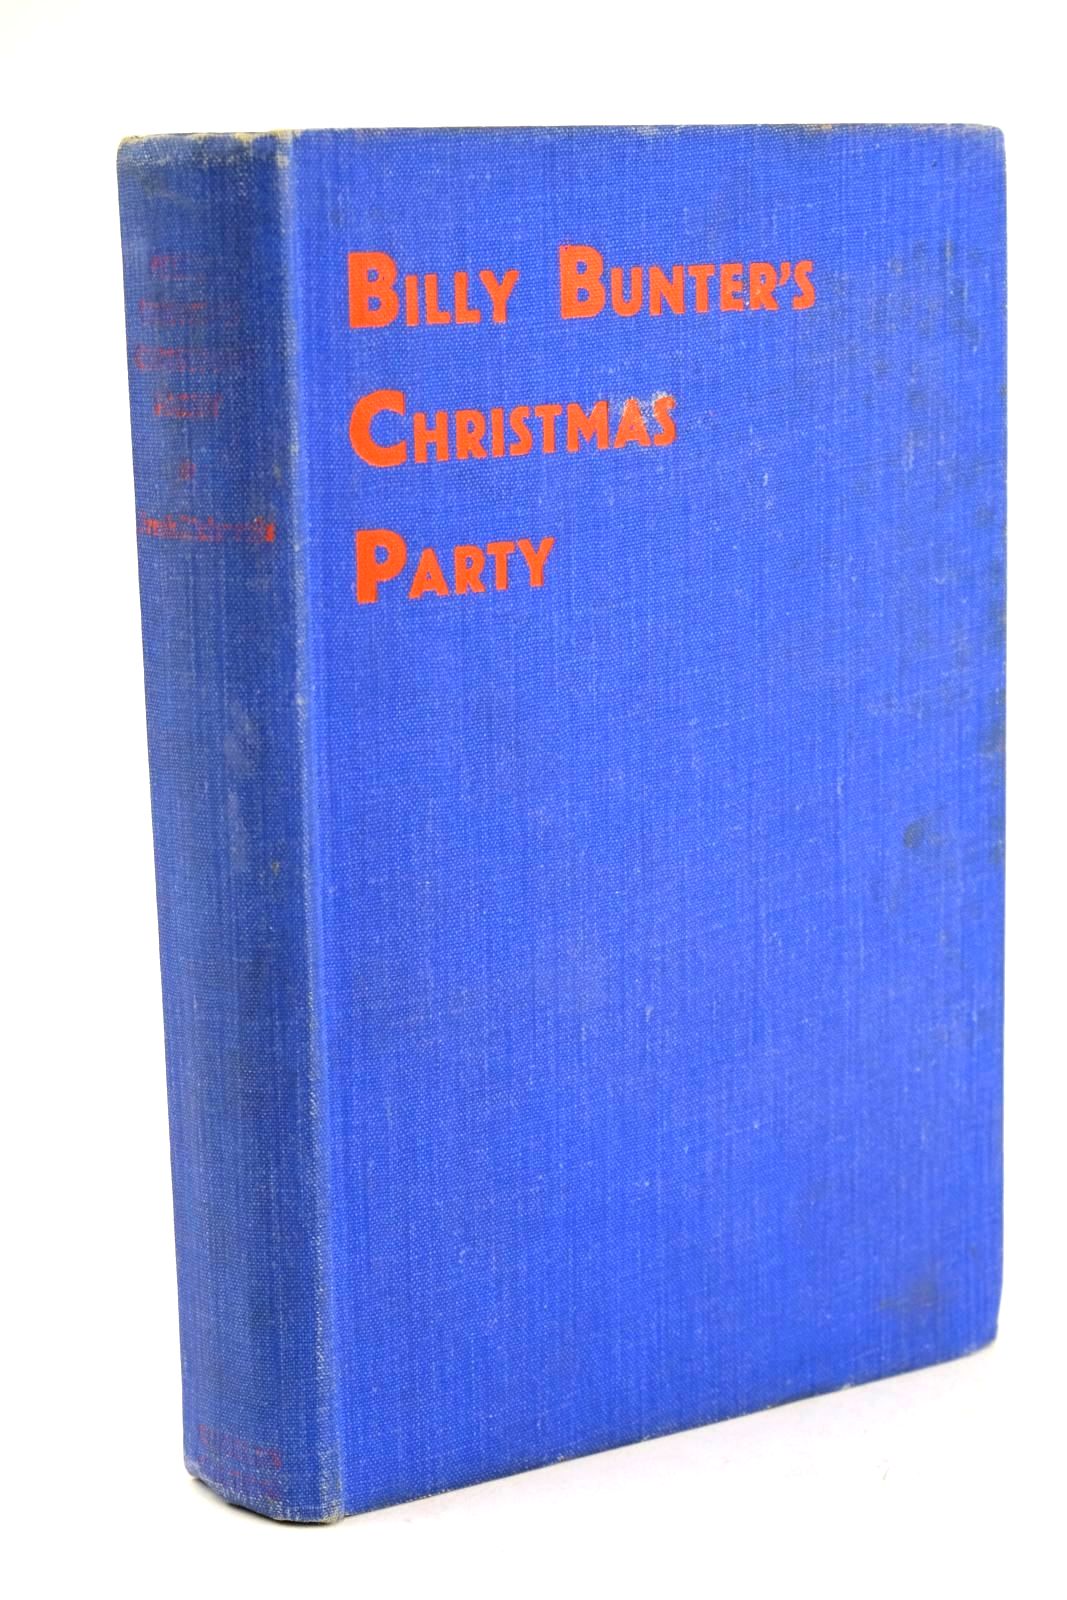 Photo of BILLY BUNTER'S CHRISTMAS PARTY written by Richards, Frank illustrated by Macdonald, R.J. published by Charles Skilton Ltd. (STOCK CODE: 1324120)  for sale by Stella & Rose's Books